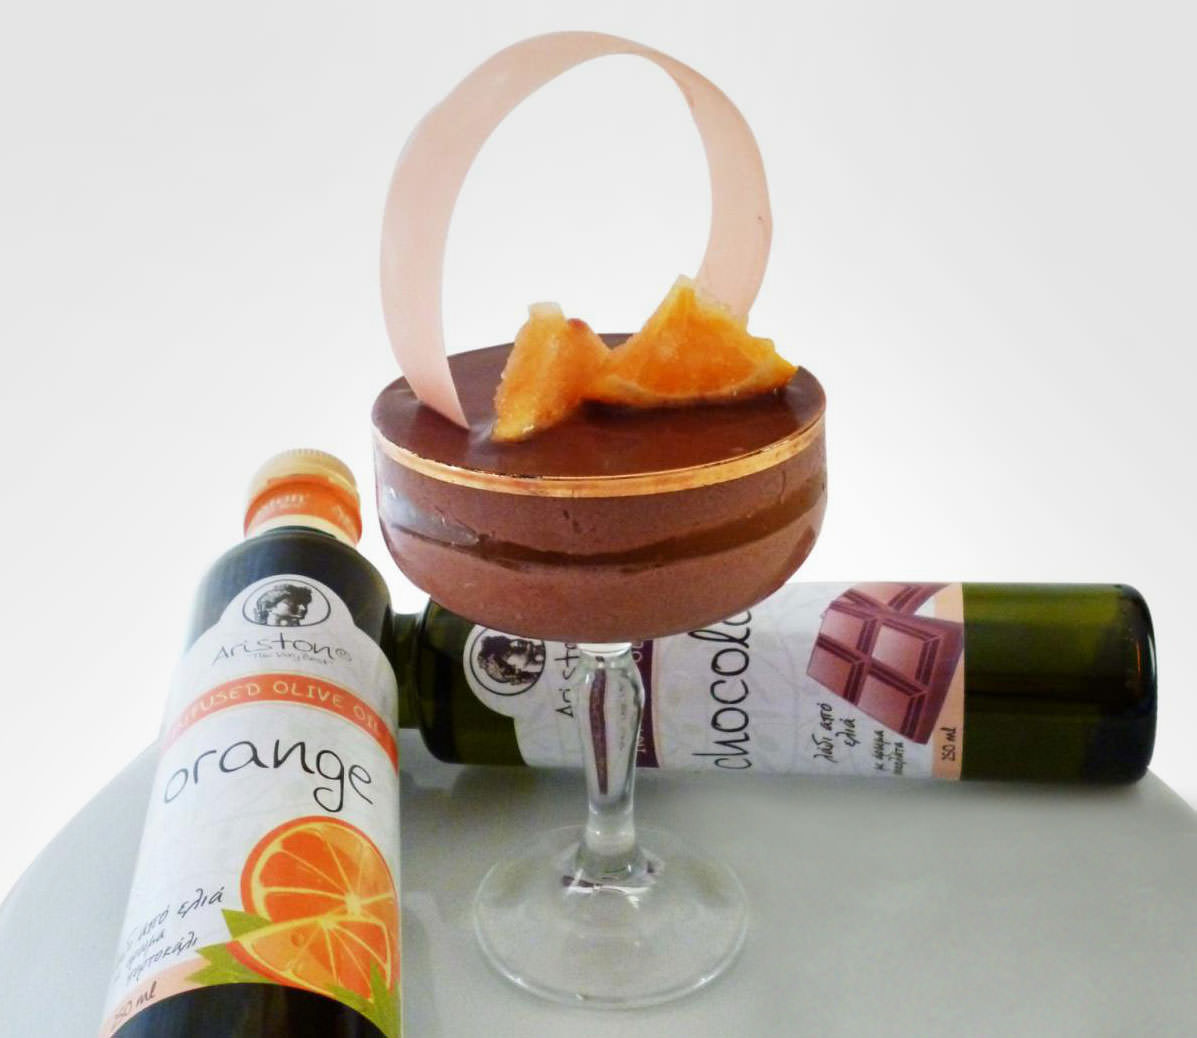 Chocolate Mousse and Orange Jelly with ARISTON’S infused Chocolate and Orange olive oils